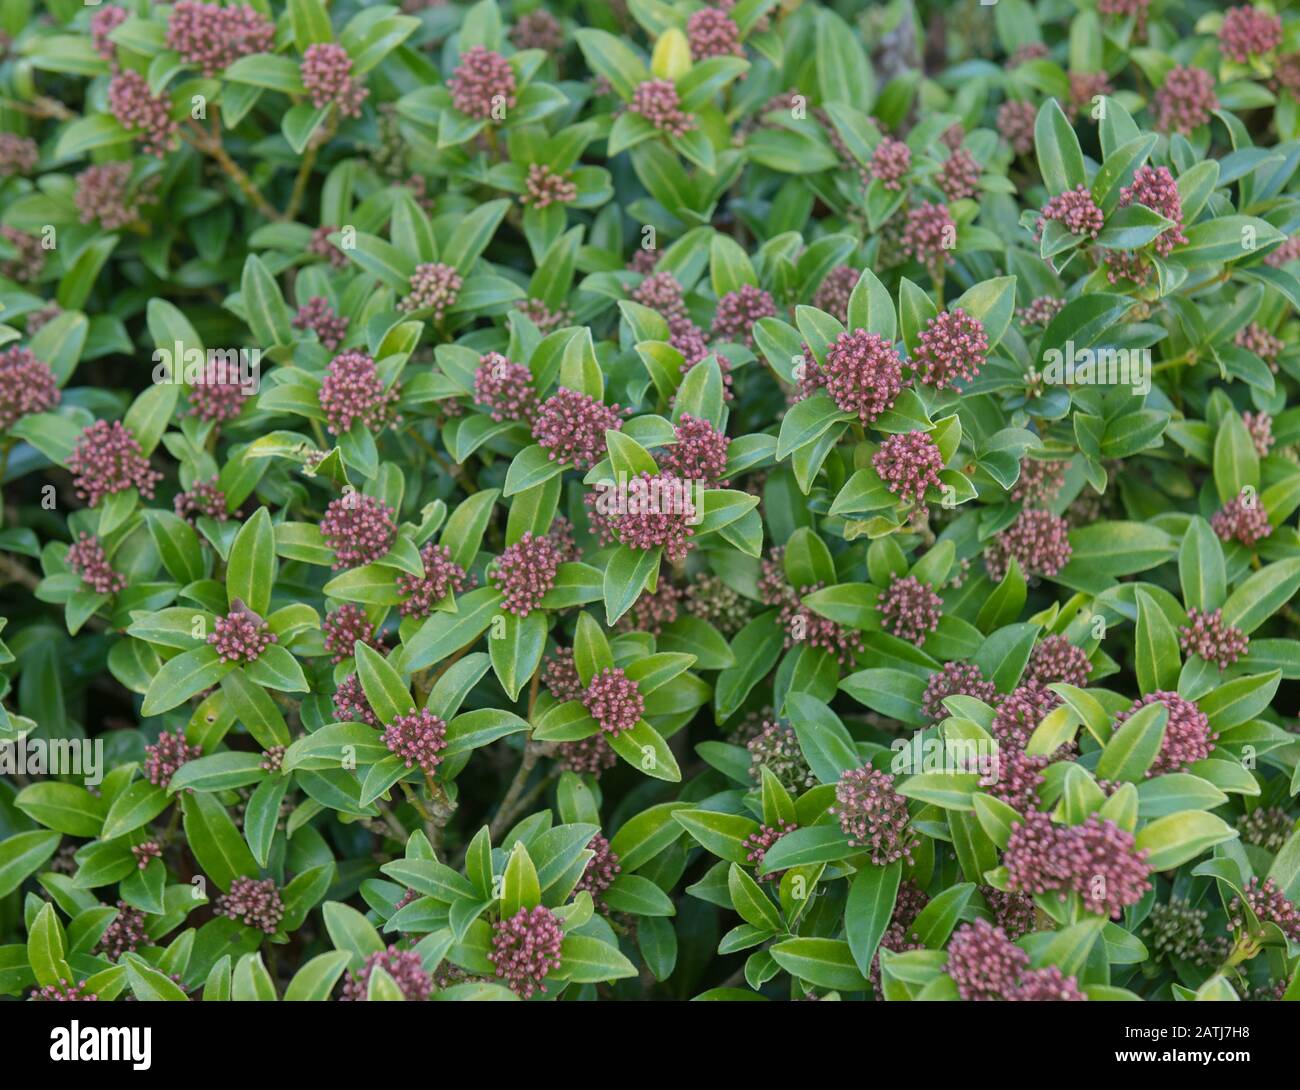 Winter Foliage and Pink Flower Buds of an Evergreen Skimmia Shrub (Skimmia japonica 'Godrie's Dwarf') in a Garden in Rural Devon, England, UK Stock Photo